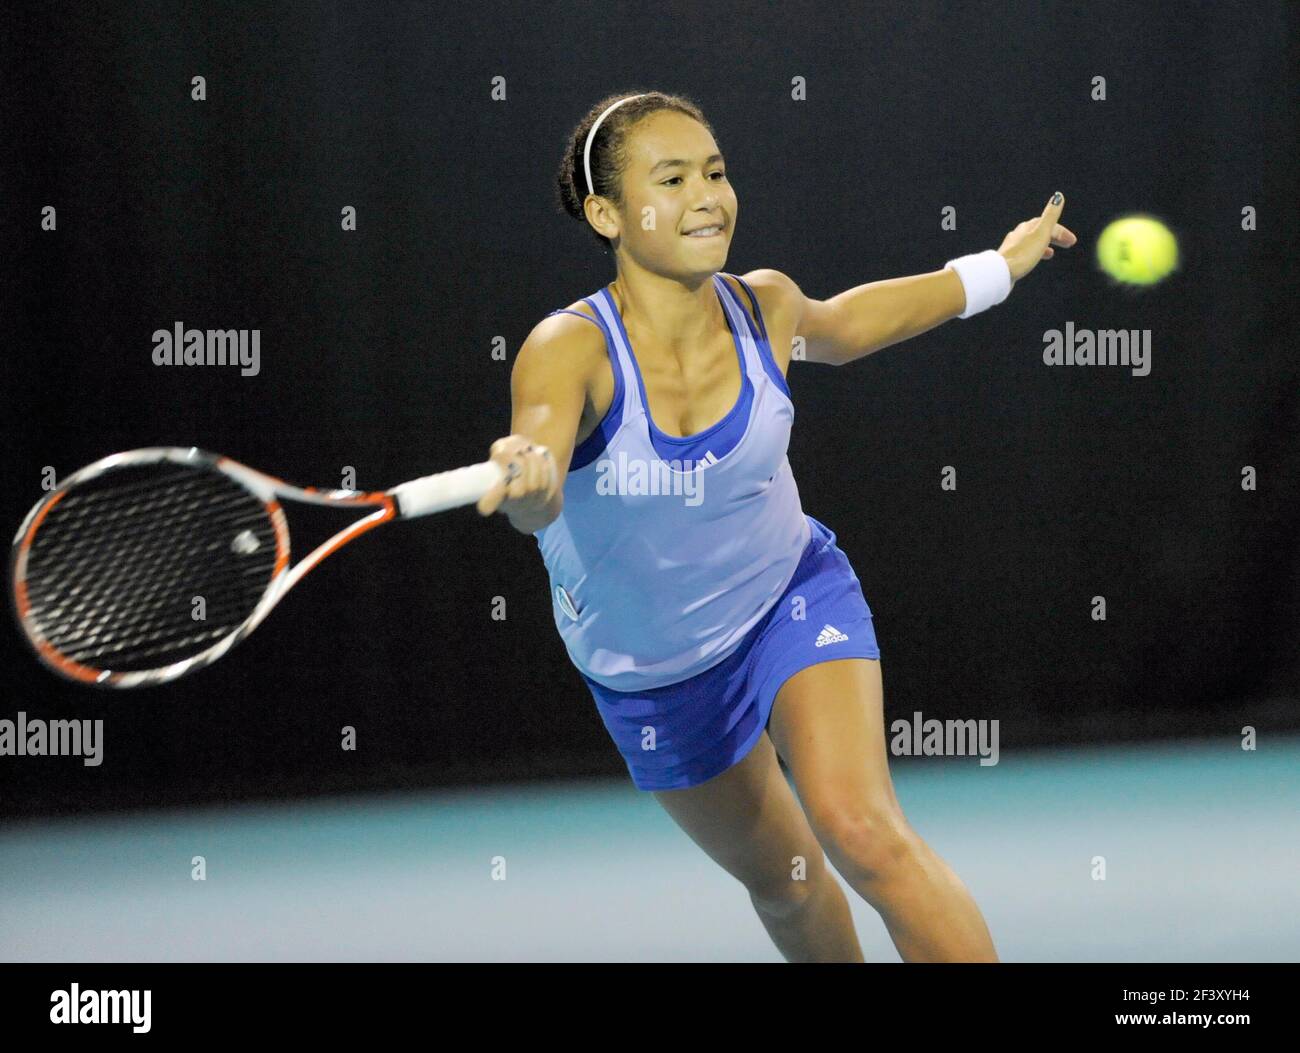 The Argon pro-Series Tennis at theTarka tennis Club Barnstable. Melanie  South during her match with Heather Watson. 7/10/09. PICTURE DAVID ASHDOWN  Stock Photo - Alamy